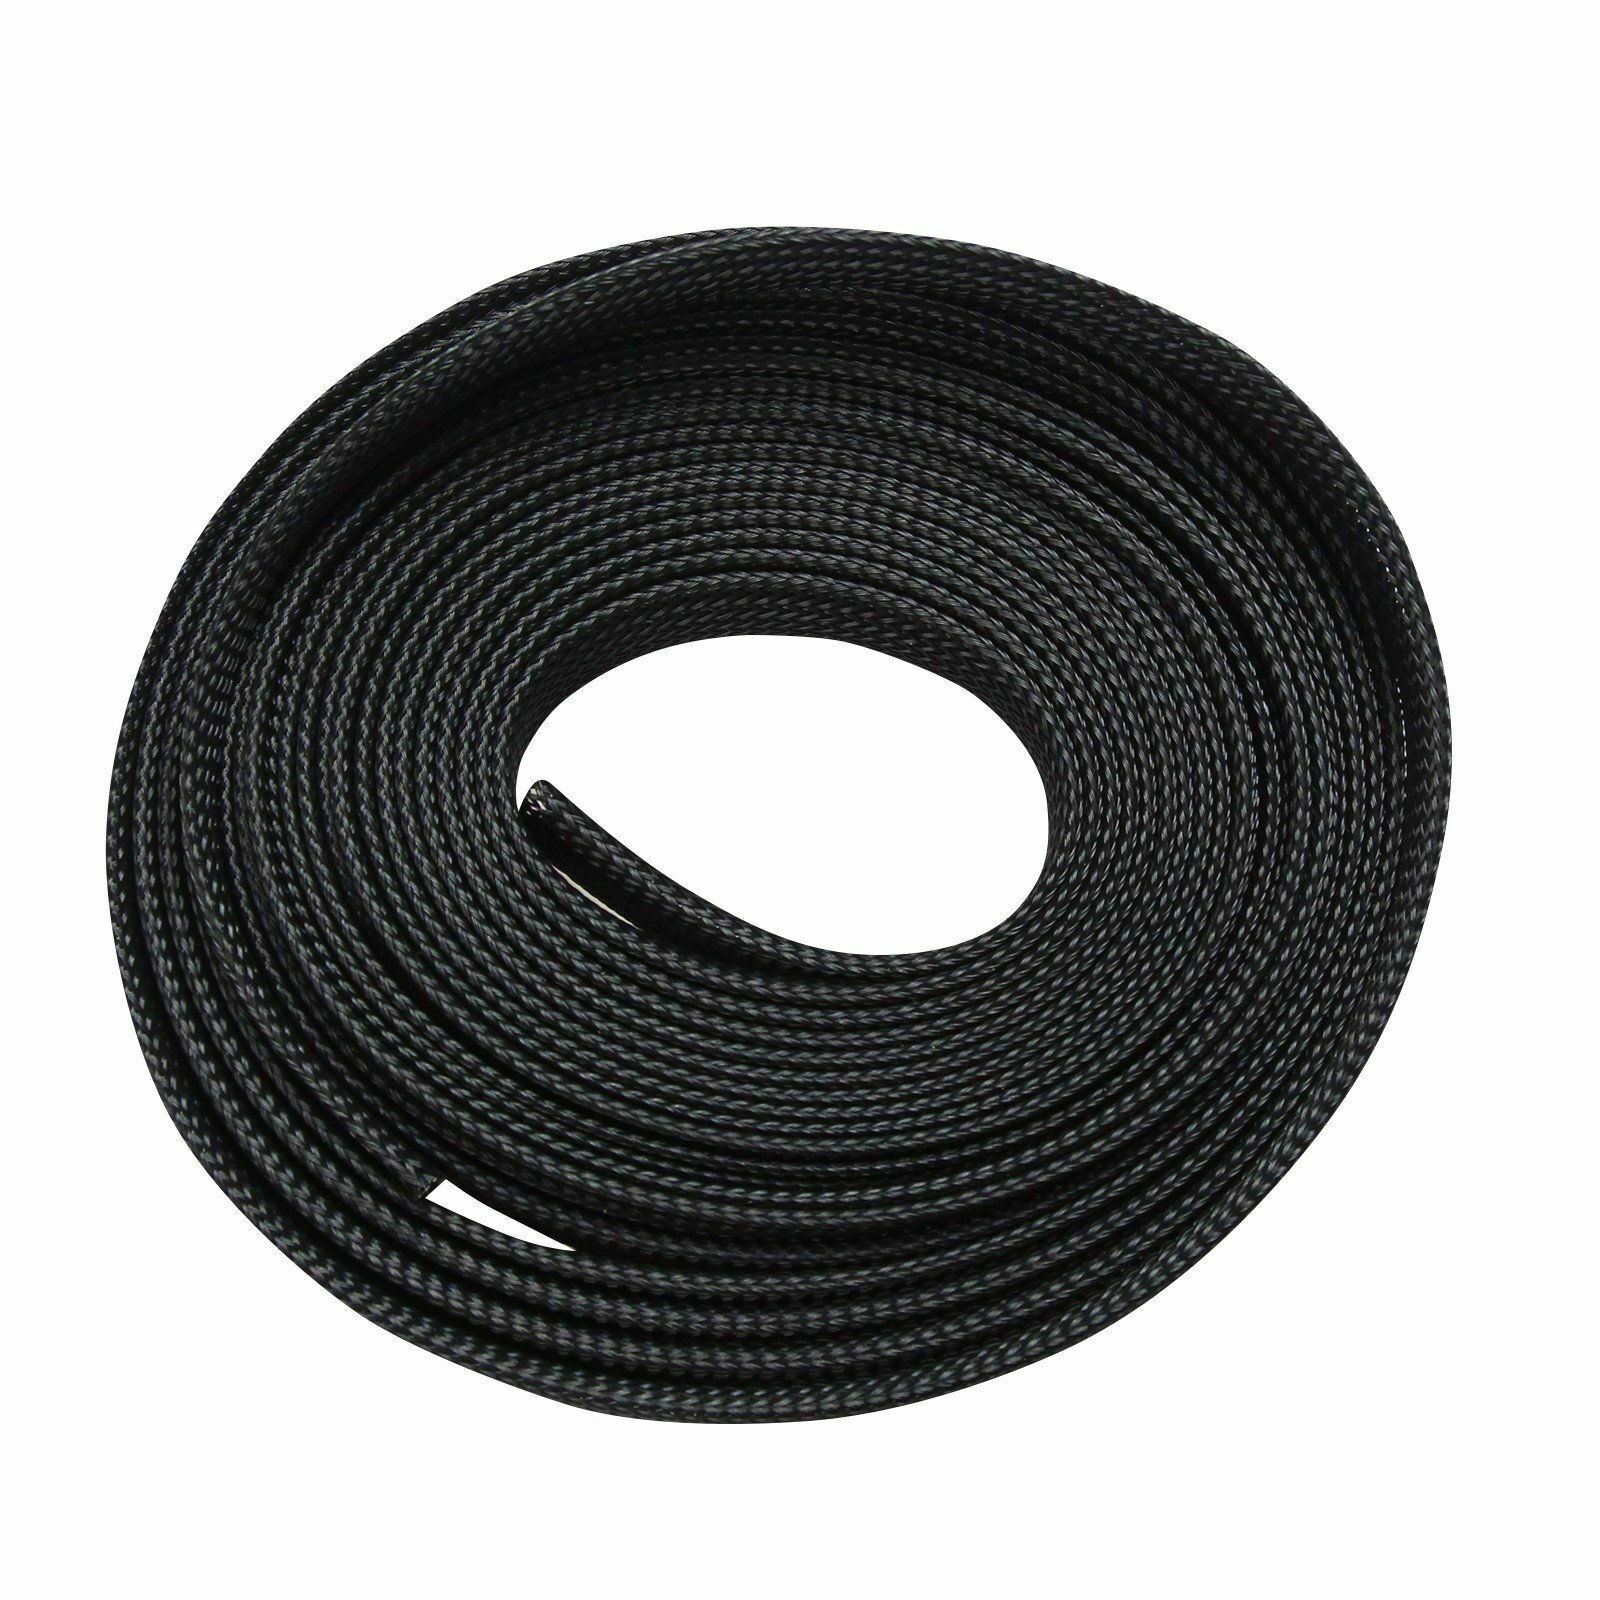 100 FT 1/2" Expandable Wire Cable Sleeving Sheathing Braided Loom Tubing Black - www.blackhorse-racing.com